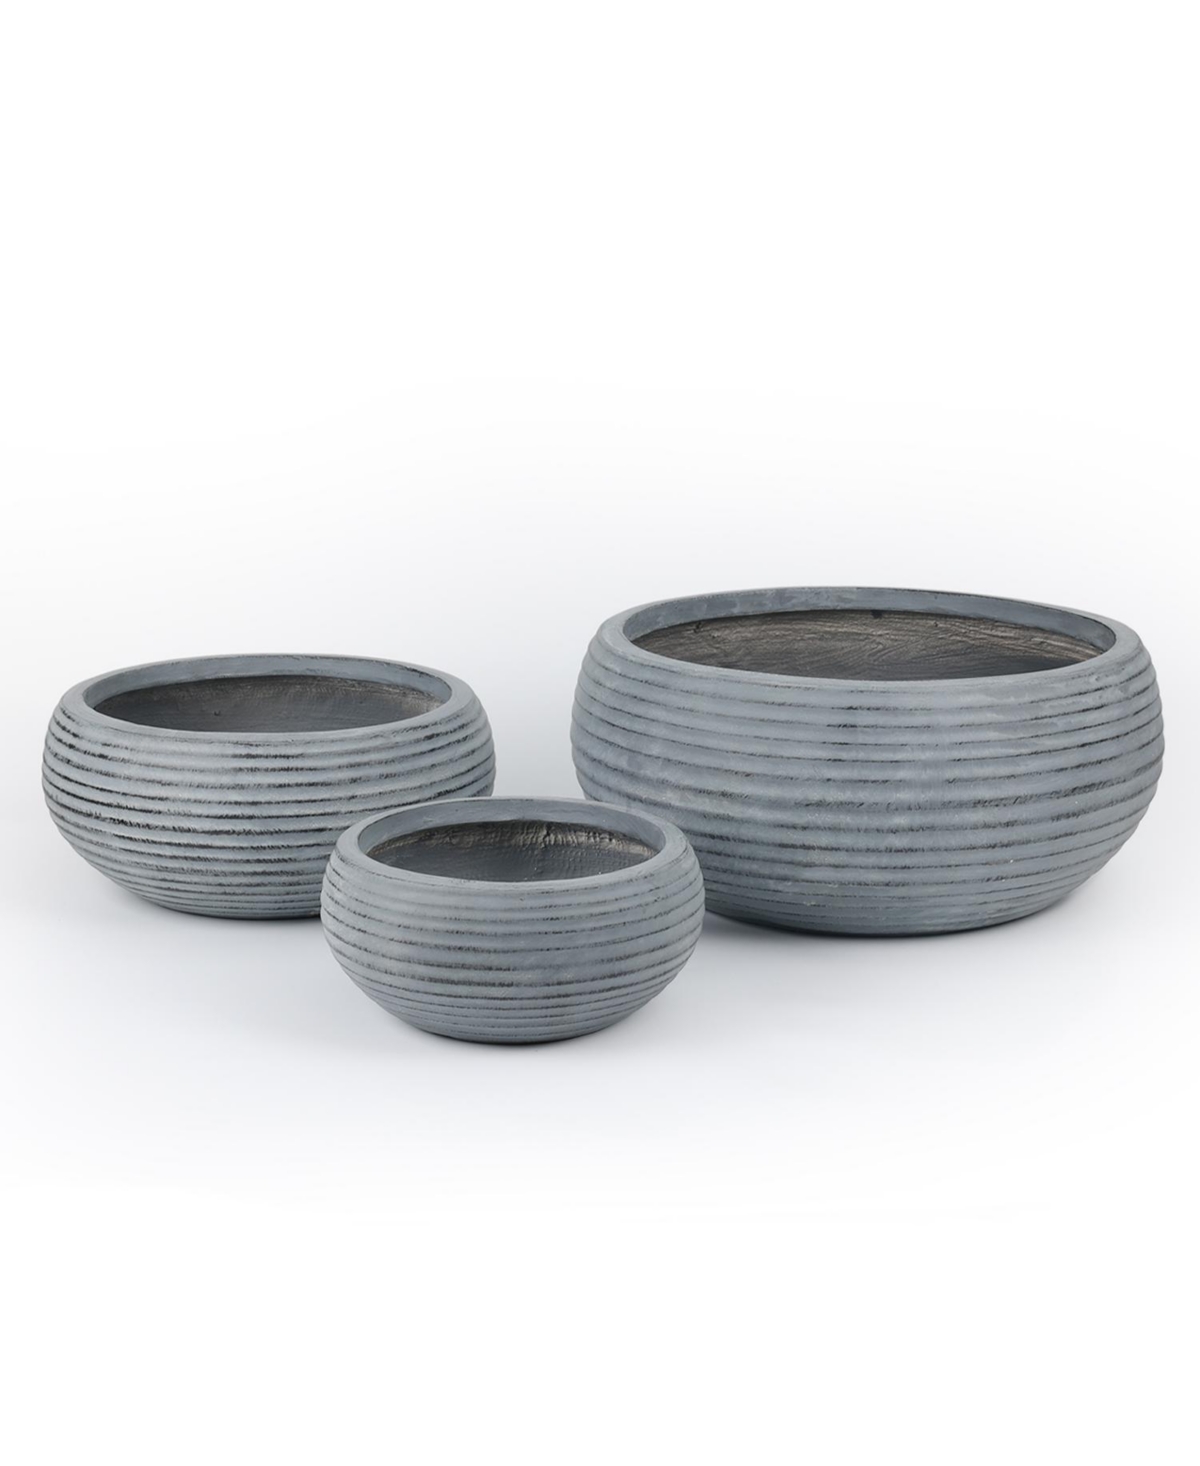 Plant Pots with Drain Hole Set of 3,5.5x6x9inch Flower Pots Outdoor Indoor, Magnesium Oxide Planter. - Grey